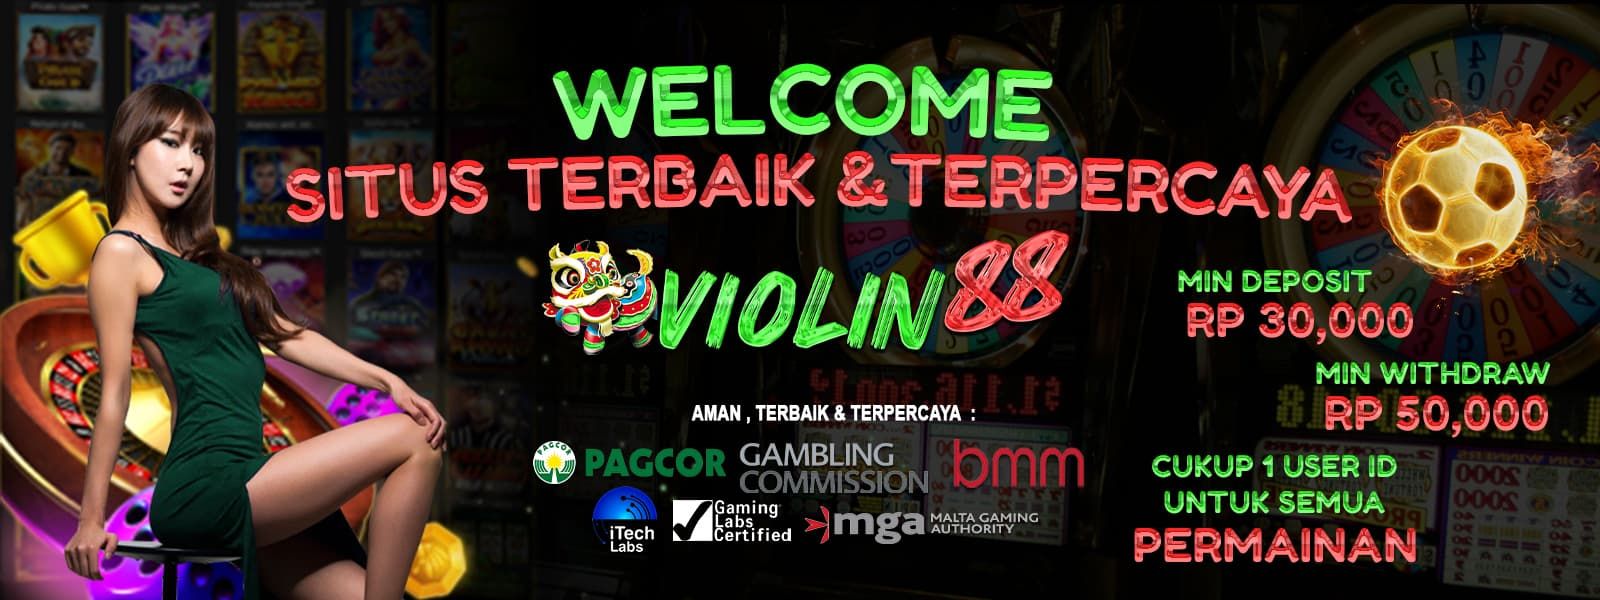 WELCOME TO VIOLIN88